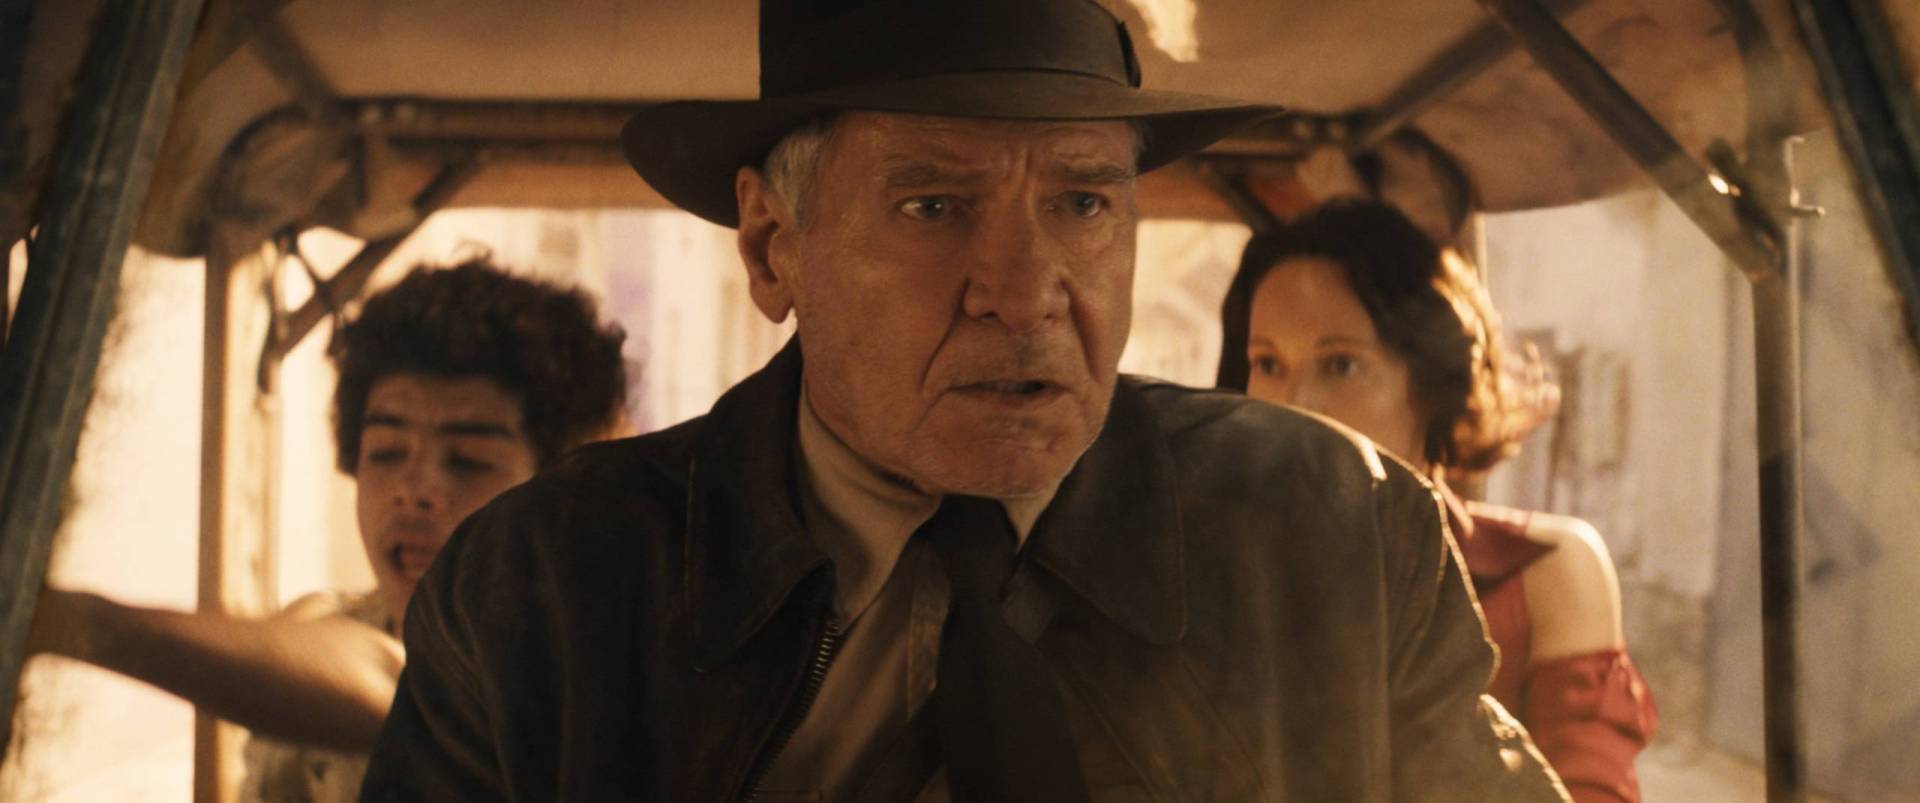 An older white man wearing a distinctive hat sits in a vehicle looking worried. Behind him, a woman and tween child sit.